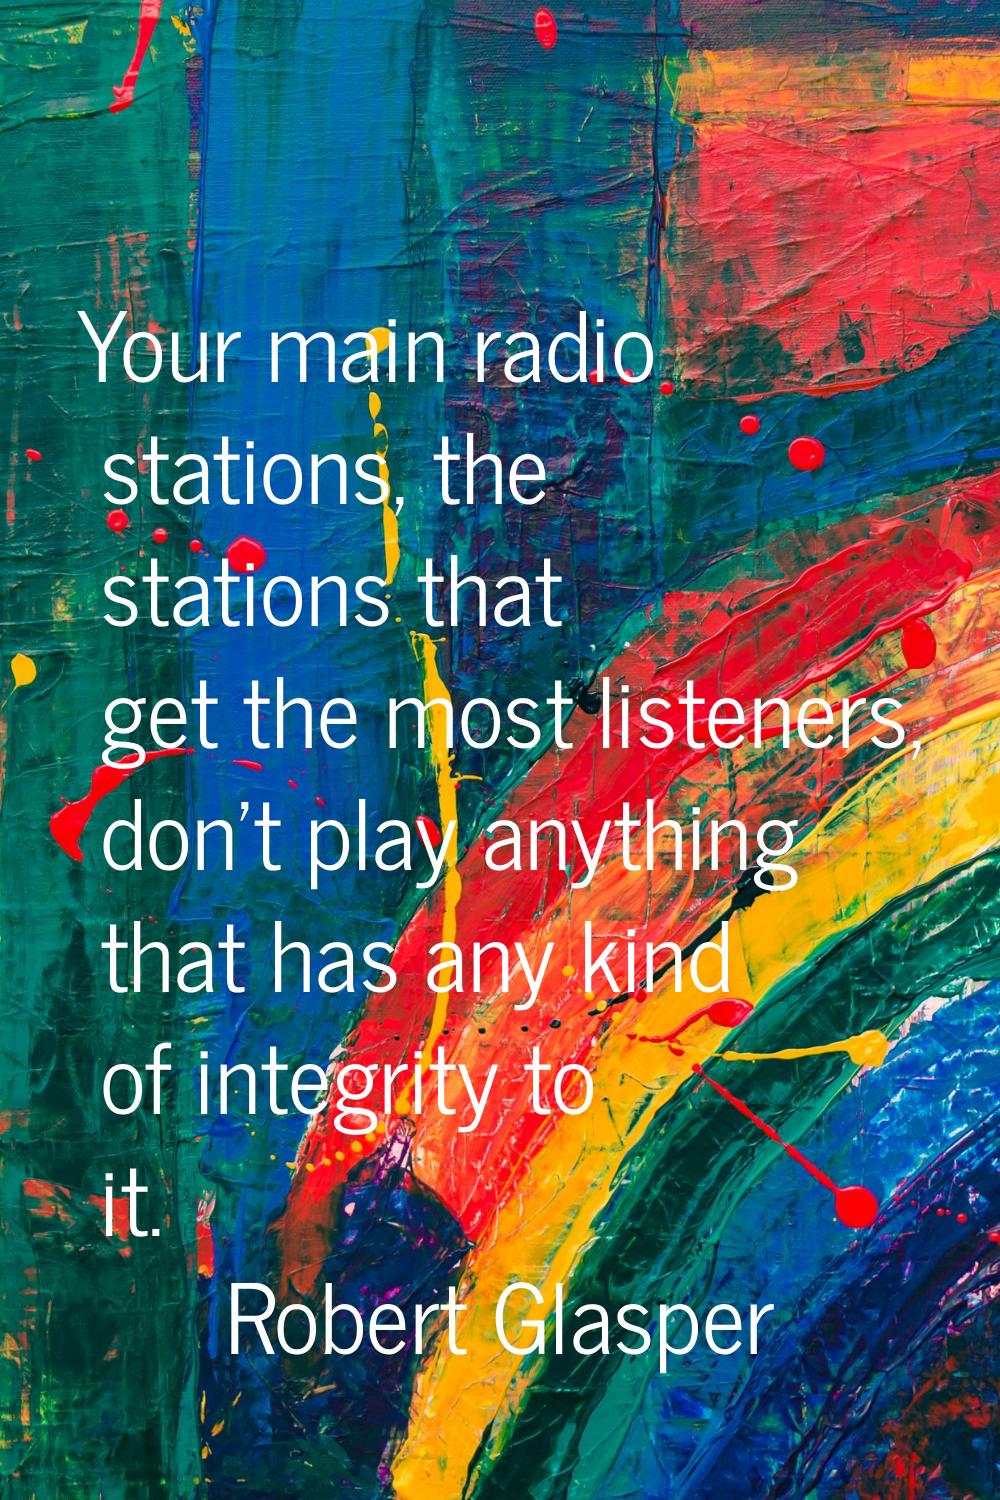 Your main radio stations, the stations that get the most listeners, don't play anything that has an